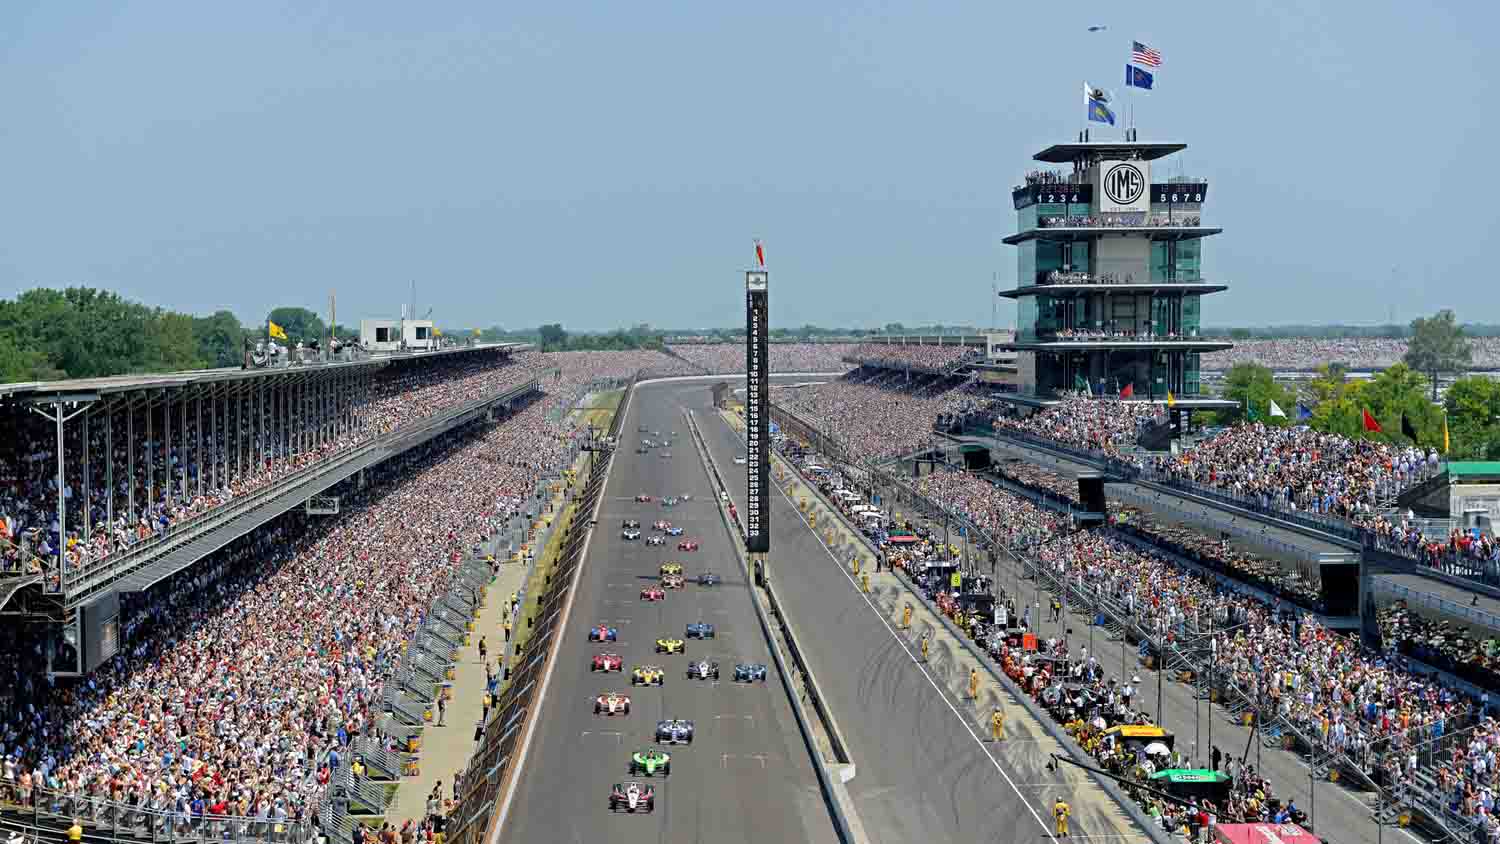 The Indianapolis Motor Speedway was repaved again and they took a core sample from the track.